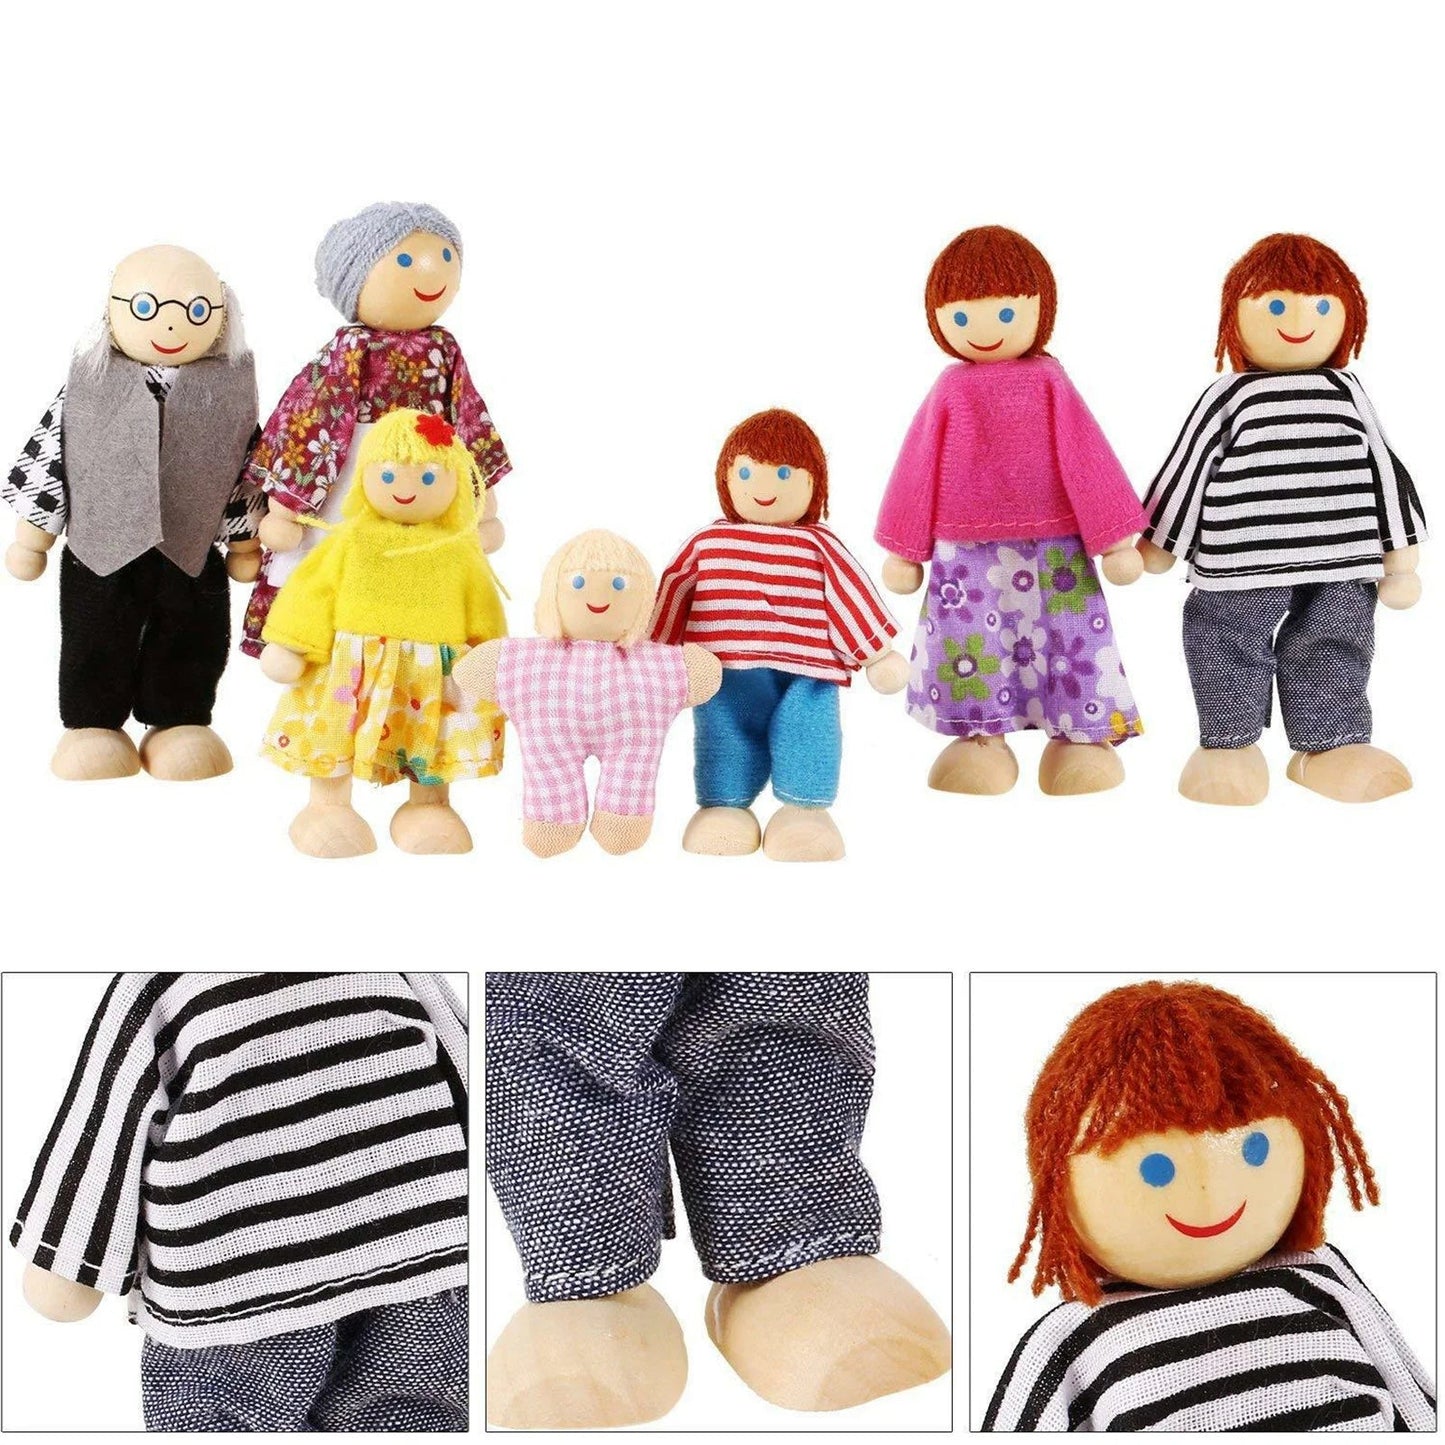 Wooden Family Member Dolls Set for Kids Pretend Play - 7 Pieces